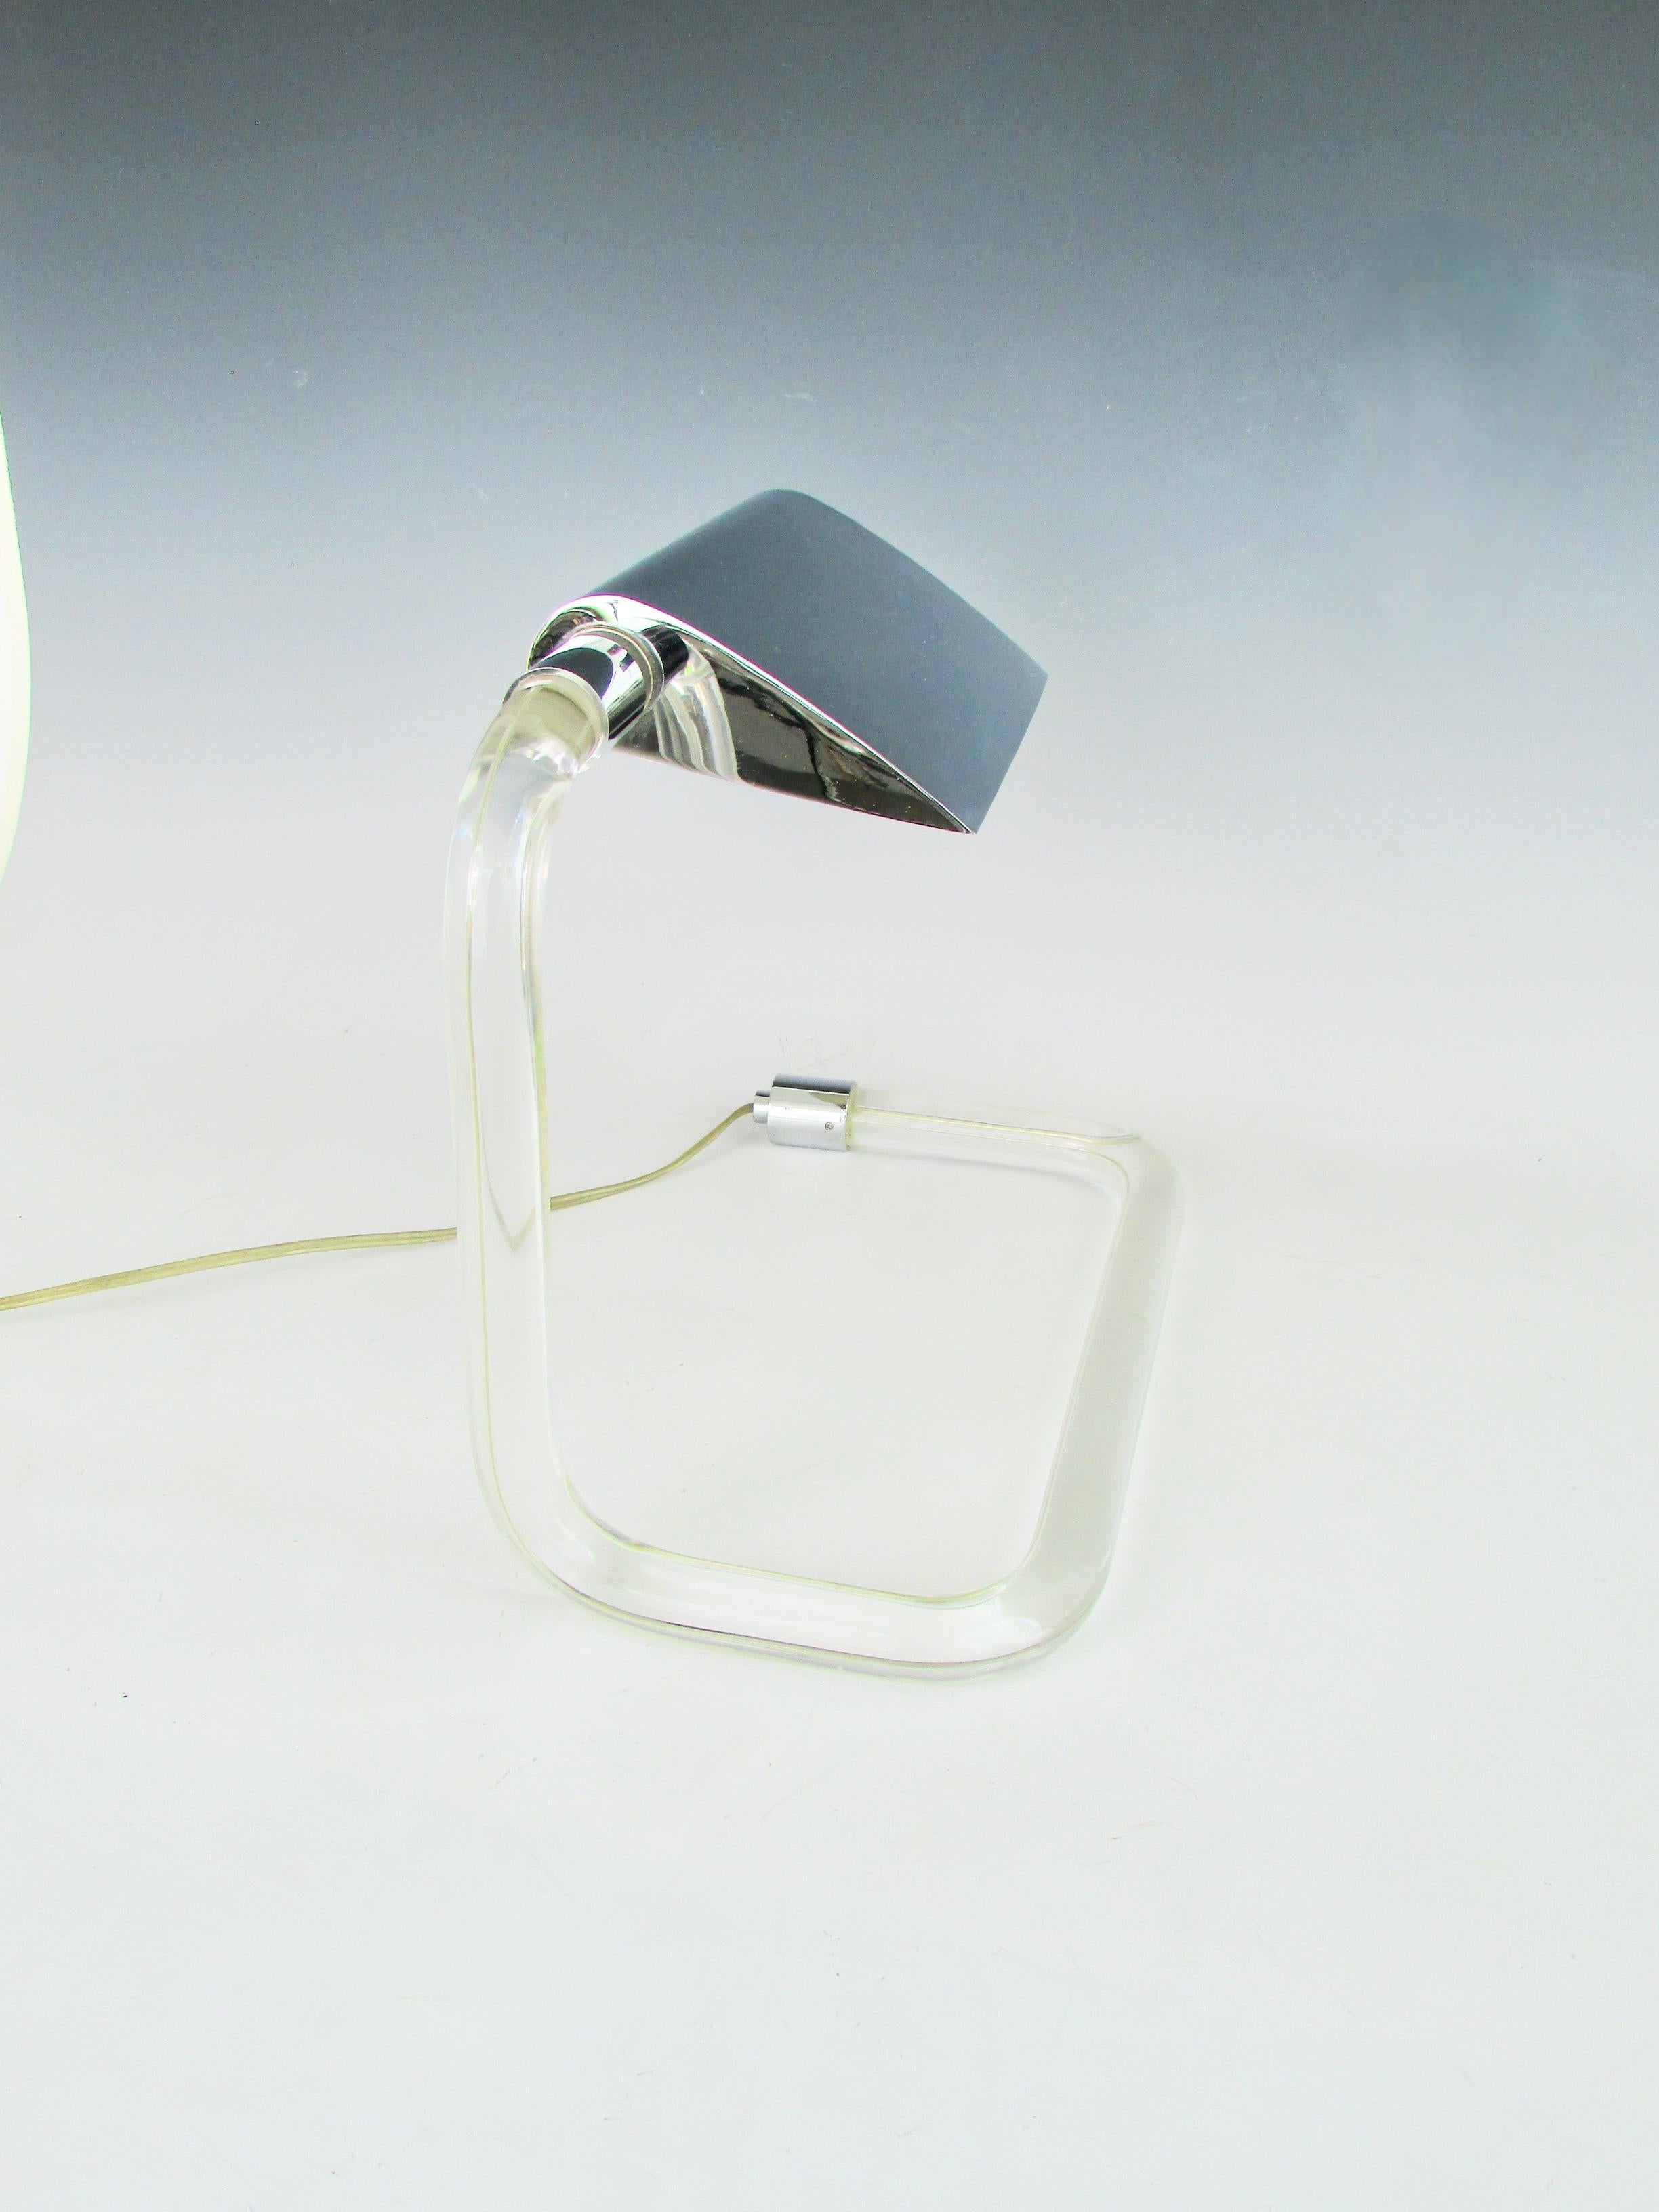 Lucite with Chrome Desk Lamp Peter Hamburger Design for Kovacs Lighting In Good Condition For Sale In Ferndale, MI